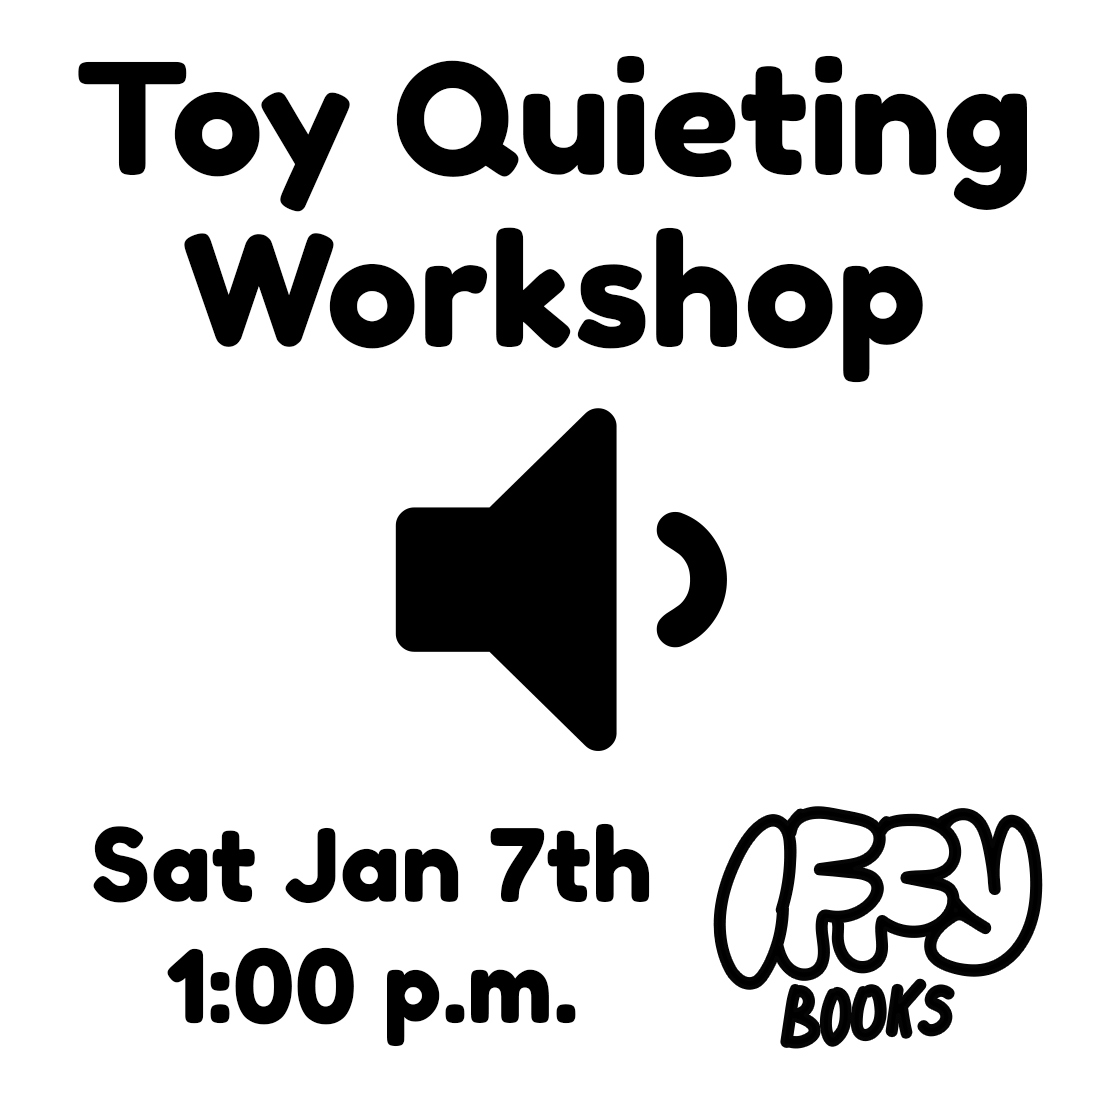 Flyer with a "low volume" symbol and the following text: Toy Quieting Workshop Sat Jan 7th 1:00 p.m. Iffy Books